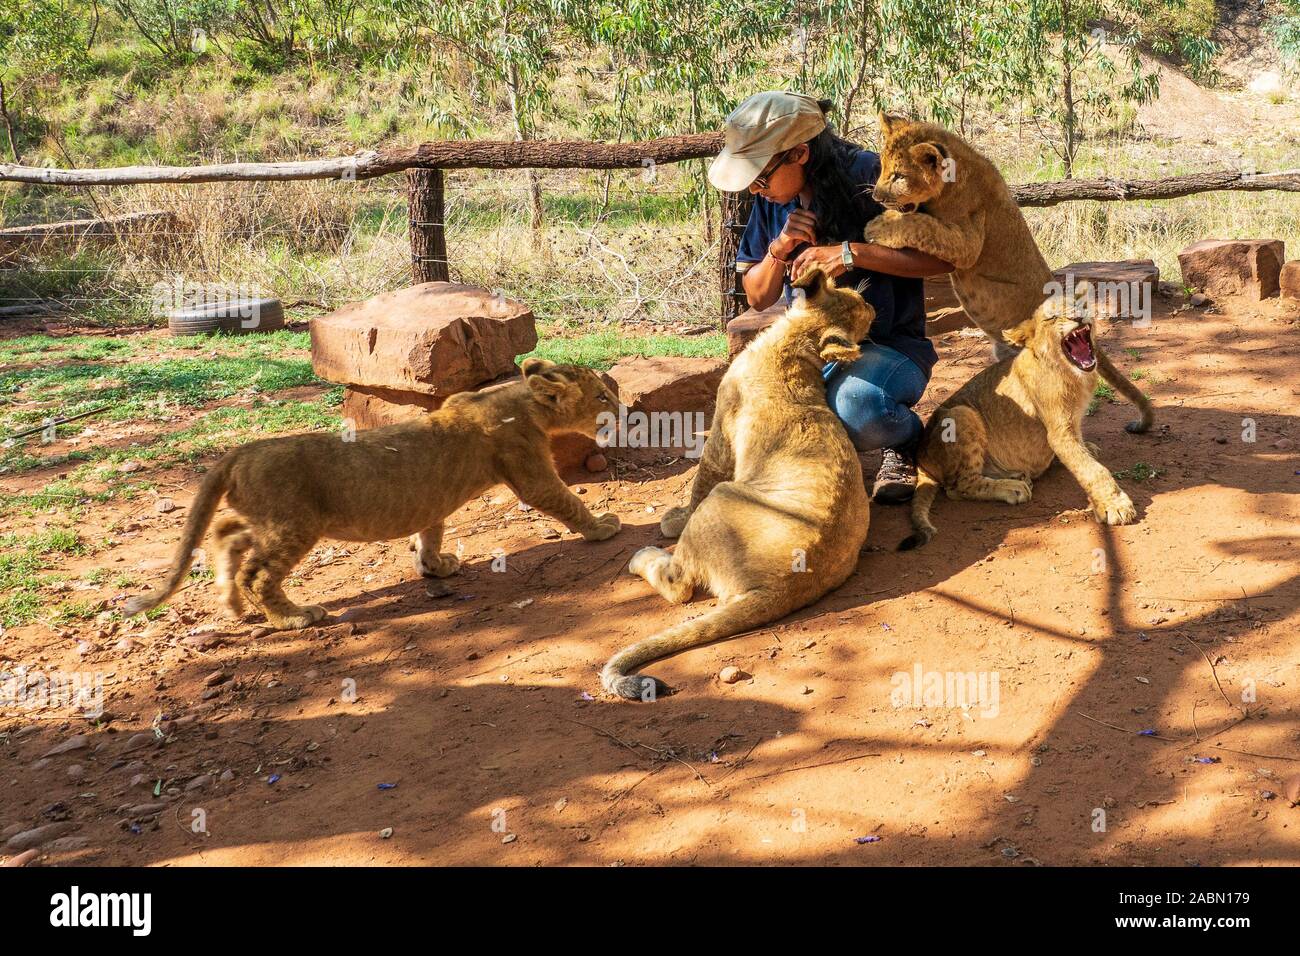 African woman crouching on the ground and playing with 4 month old lion cubs (Panthera leo) - Colin's Horseback Africa near Cullinan, South Africa Stock Photo